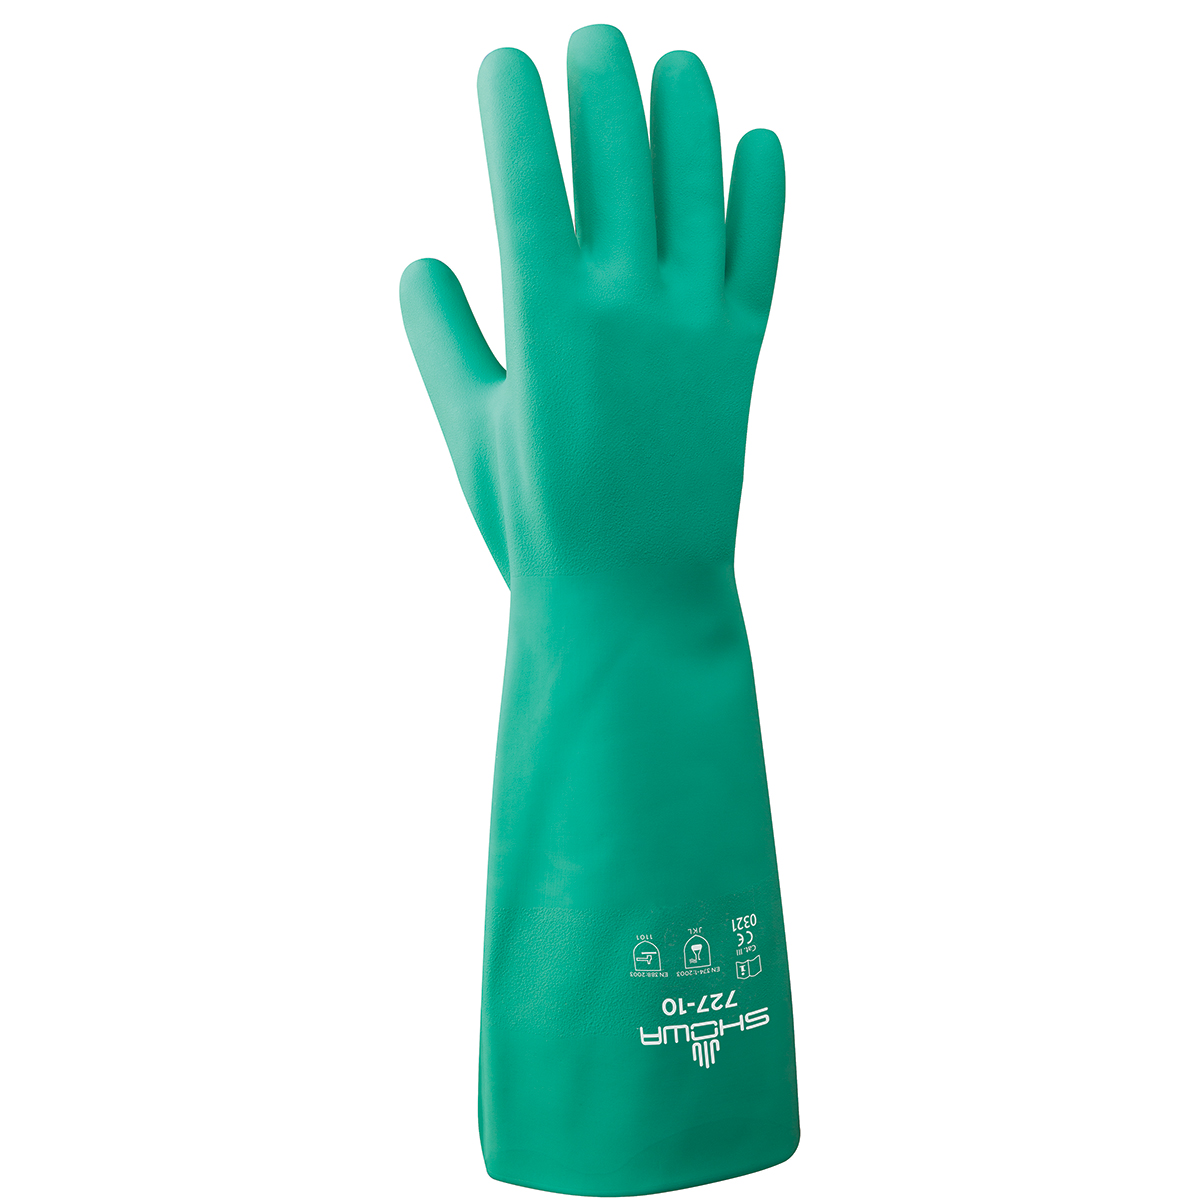 Chemical resistant unsupported nitrile, 13", 15-mil, light green, bisque finish, unlined, extra large